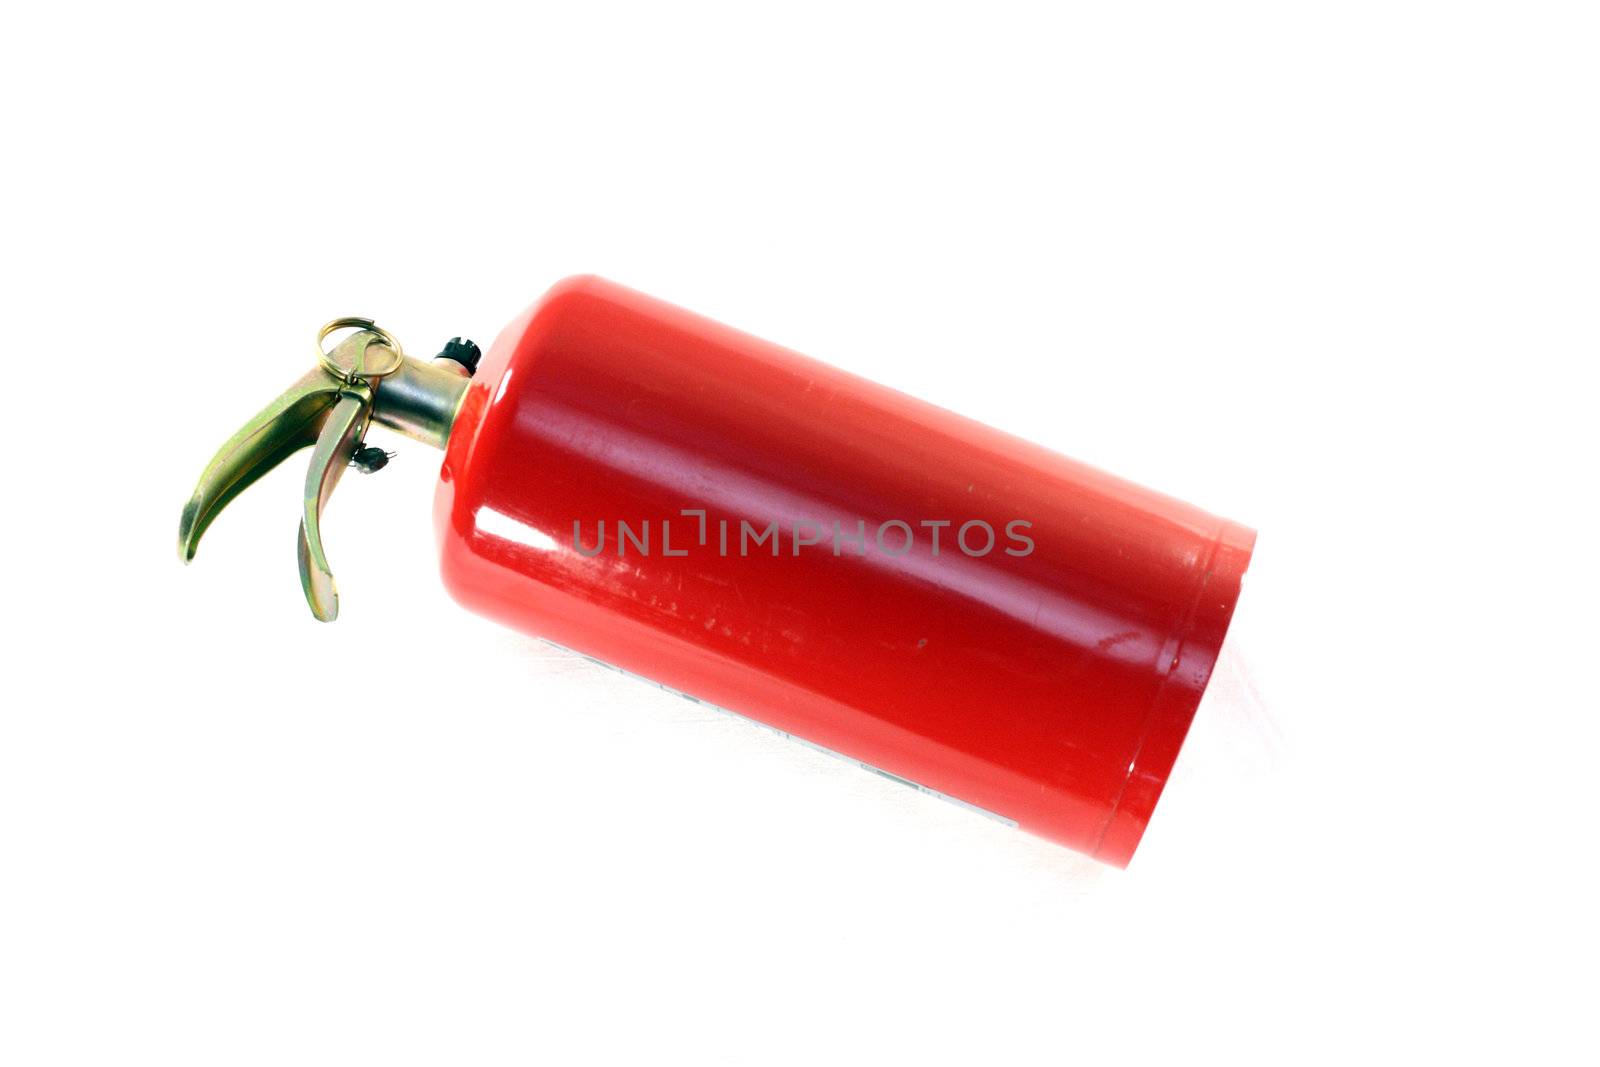 Fire Extinguisher, Burning, Red, Equipment, Chemical, Handle, Isolated, Metal, extinguisher, safety, cylinder
